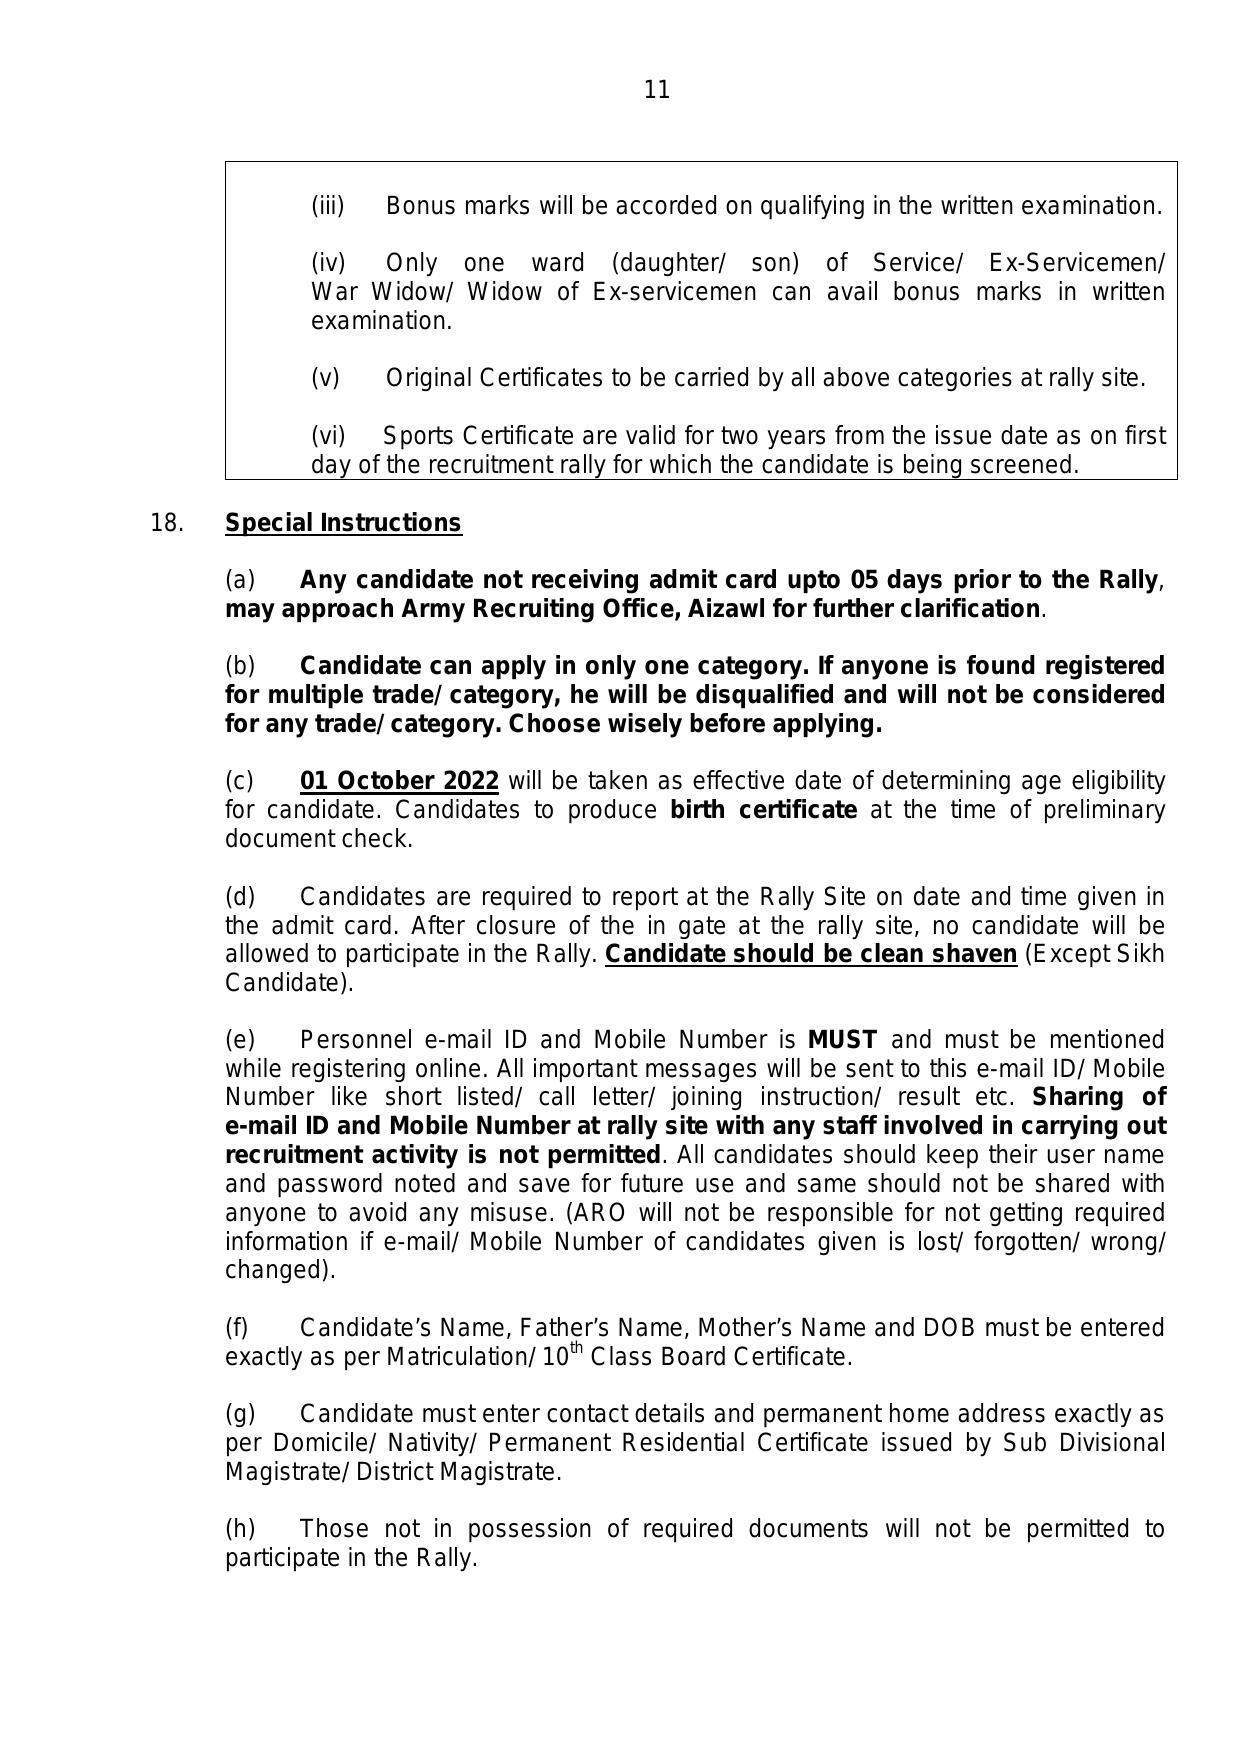 The Indian Army Invites Application for Agniveer Recruitment 2022 - Page 11